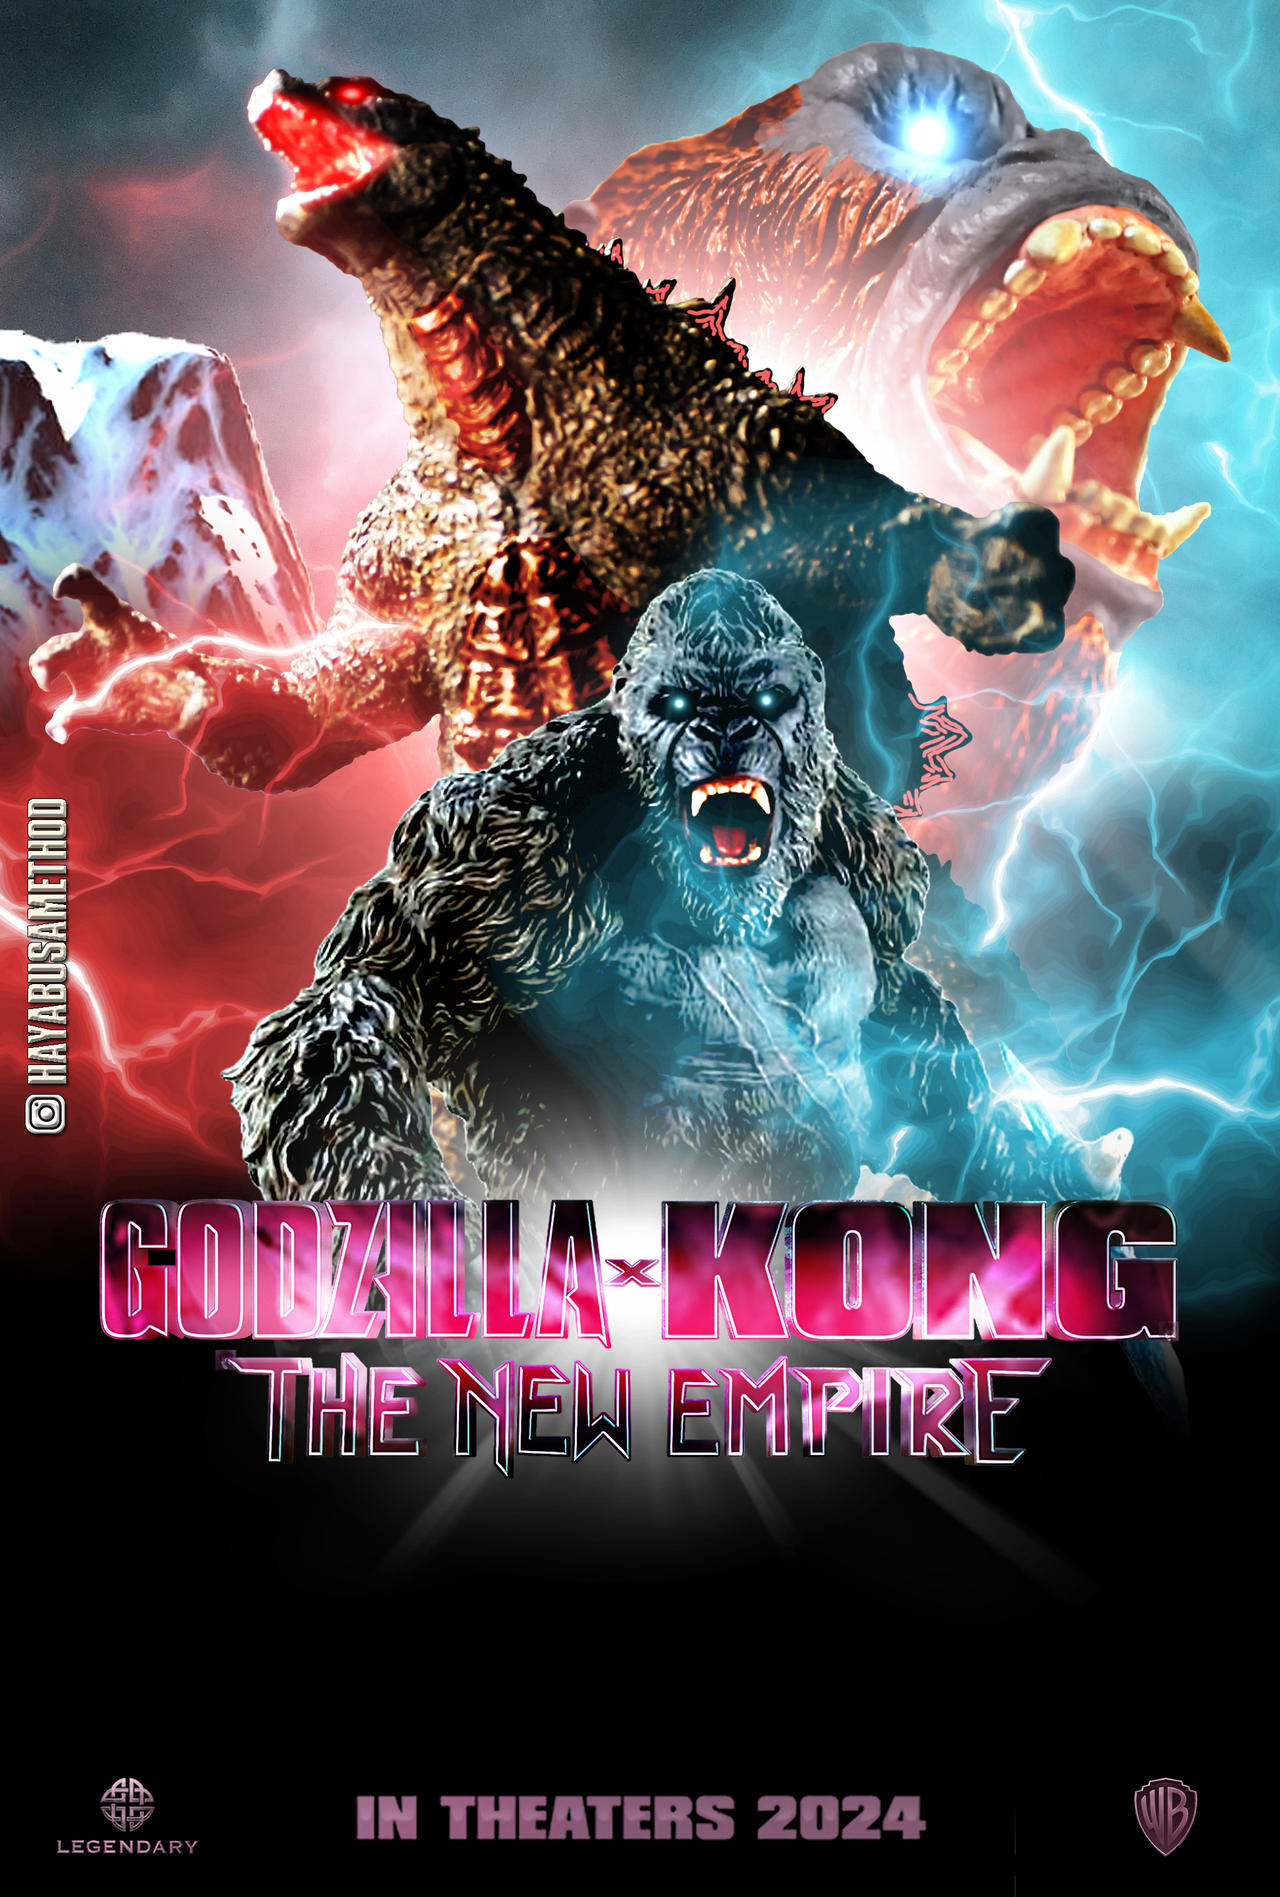 Massive Godzilla X Kong: The New Empire Updates - Posters, First Trailer  and Toys - The Toku Source